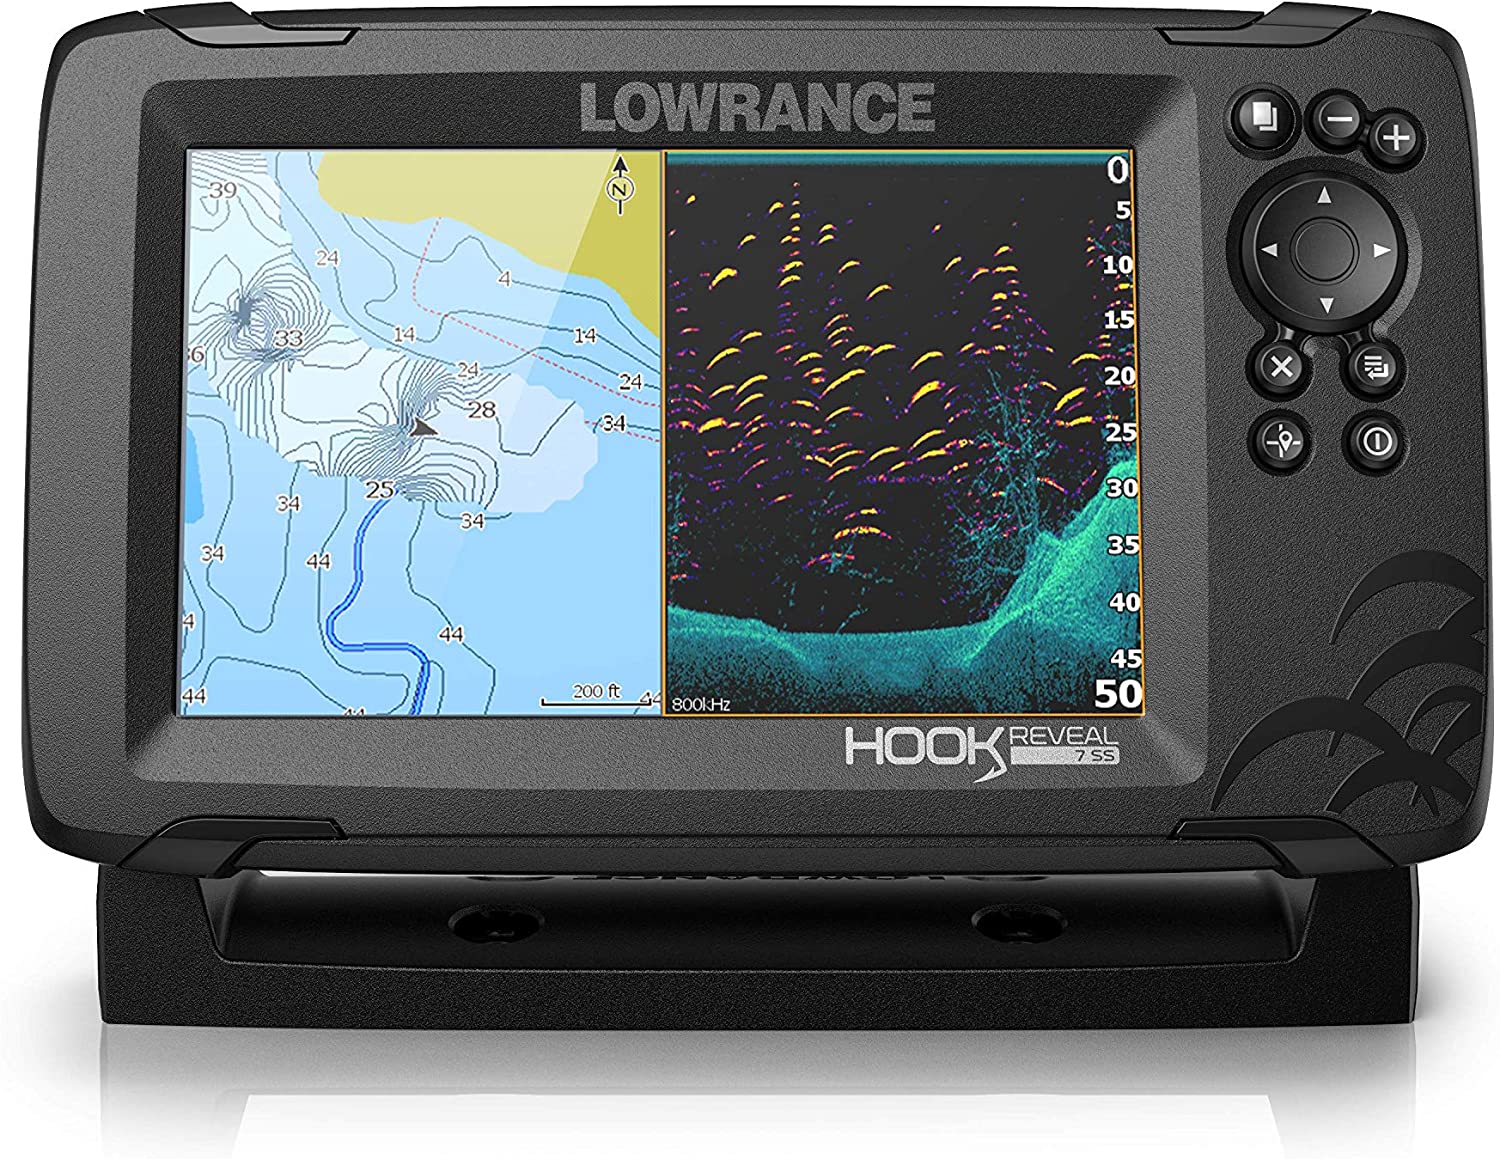 Lowrance hook 7 is the best fish finder for a kayak